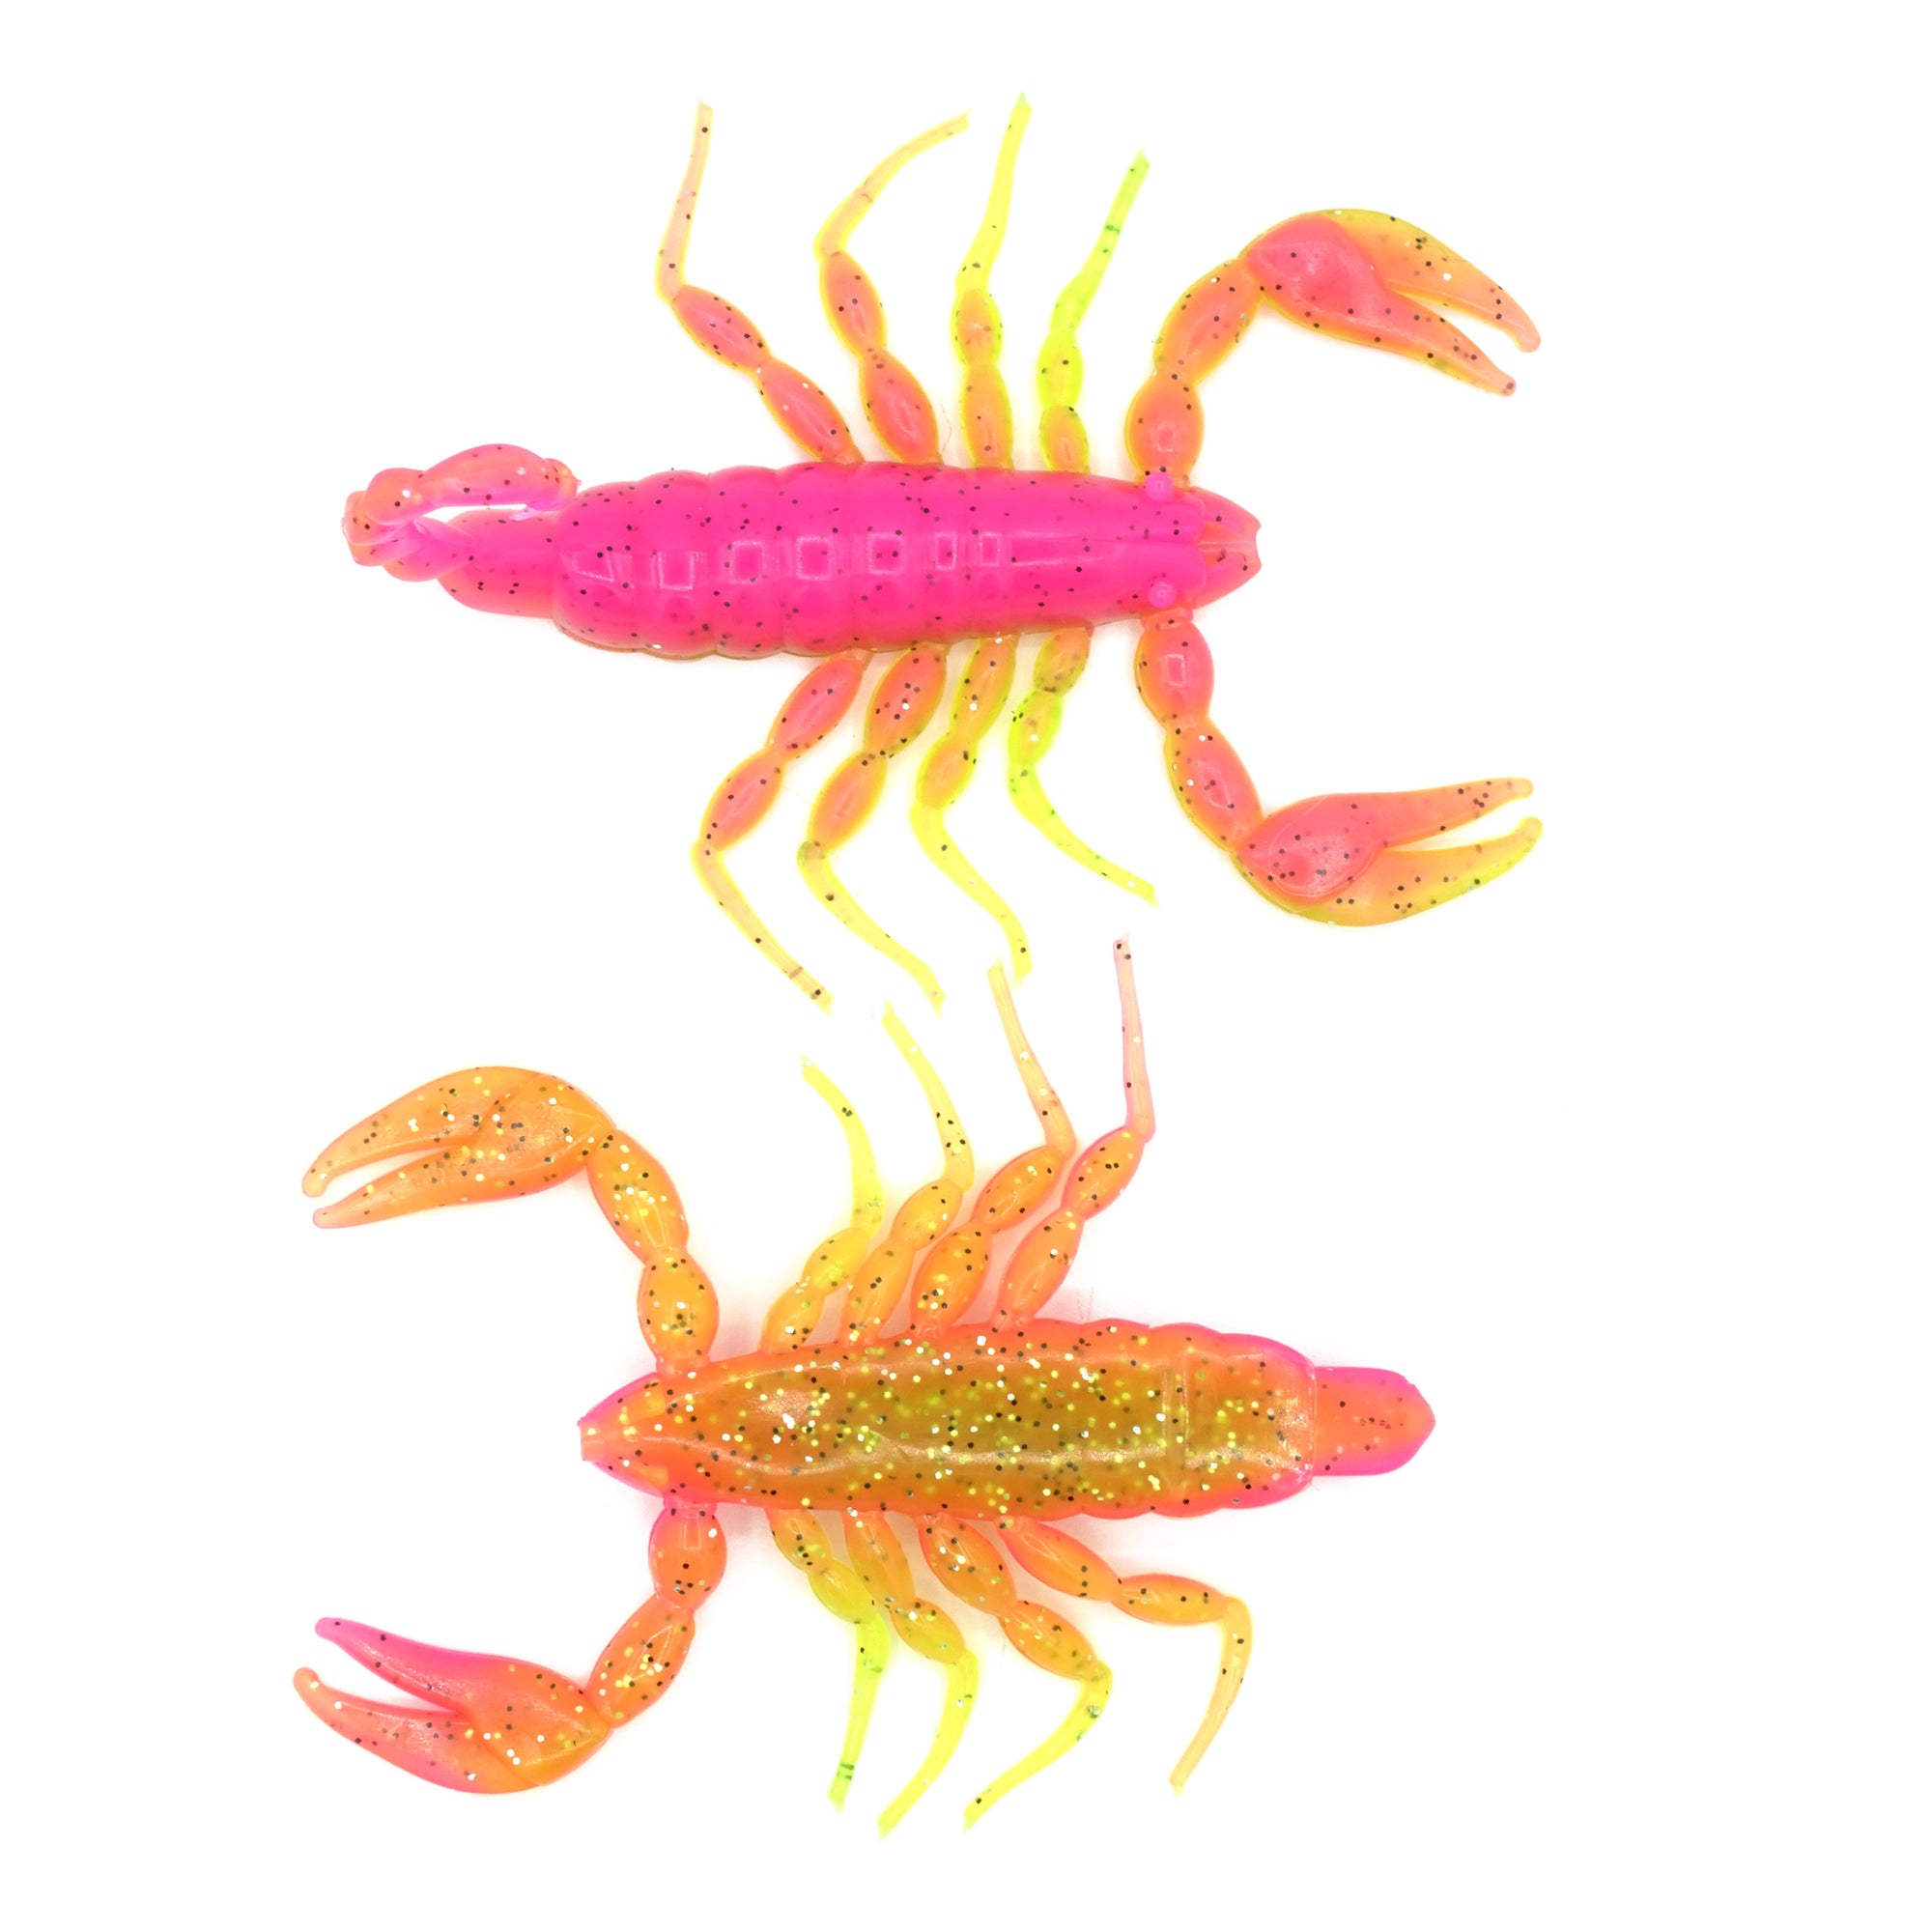 Pink and chartreuse soft plastic scorpion bait used for fishing. Fresh baitz electric chicken scorpion